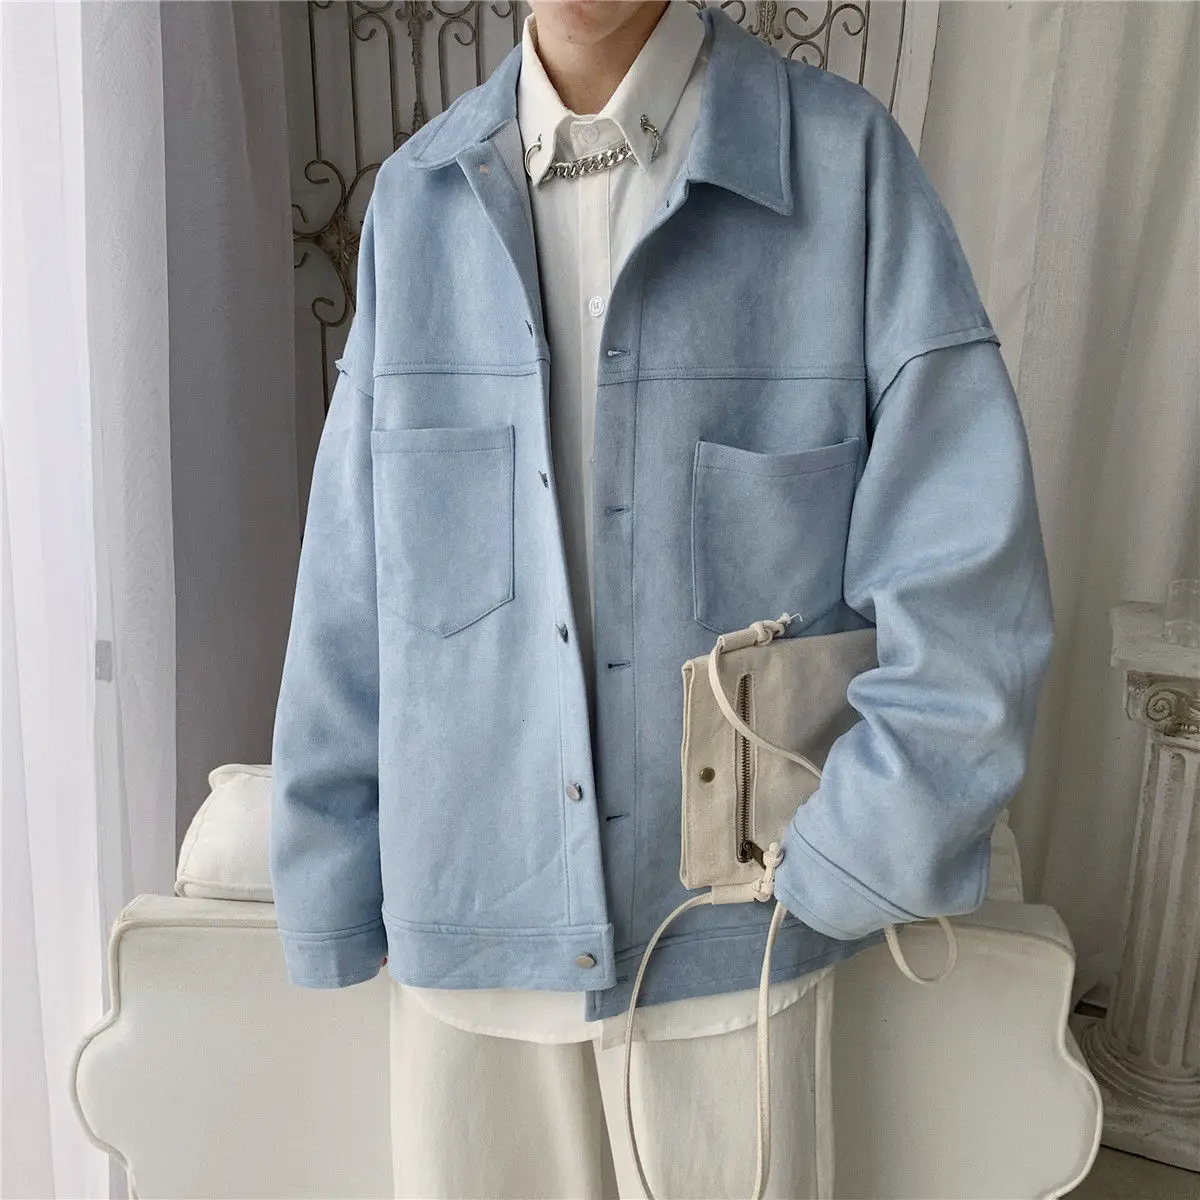 

Privathinker Men's Solid Oversized Suede Jackets Korean Style Men Casual Loose Coats 2020 Autumn New Men's Fashion Outerwear